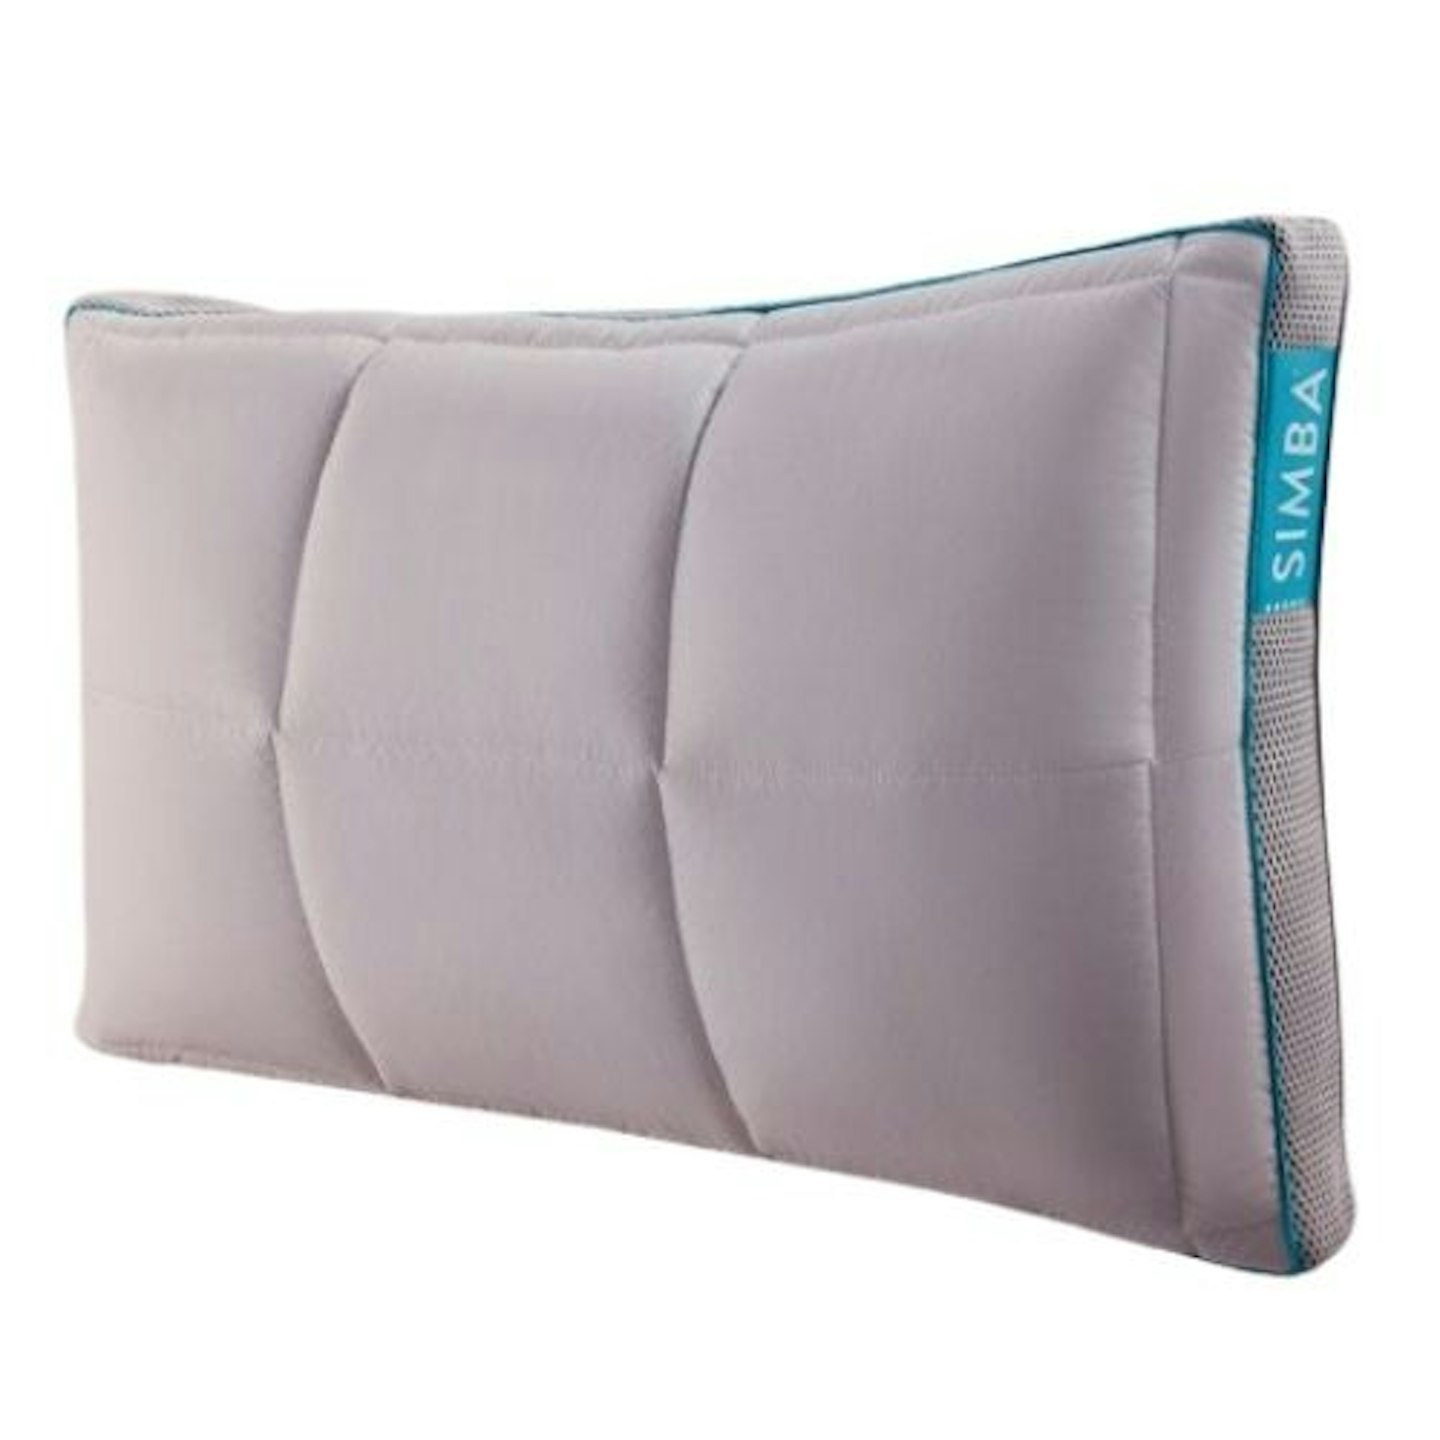 The best pillows for neck pain: The Simba Hybrid Pillow